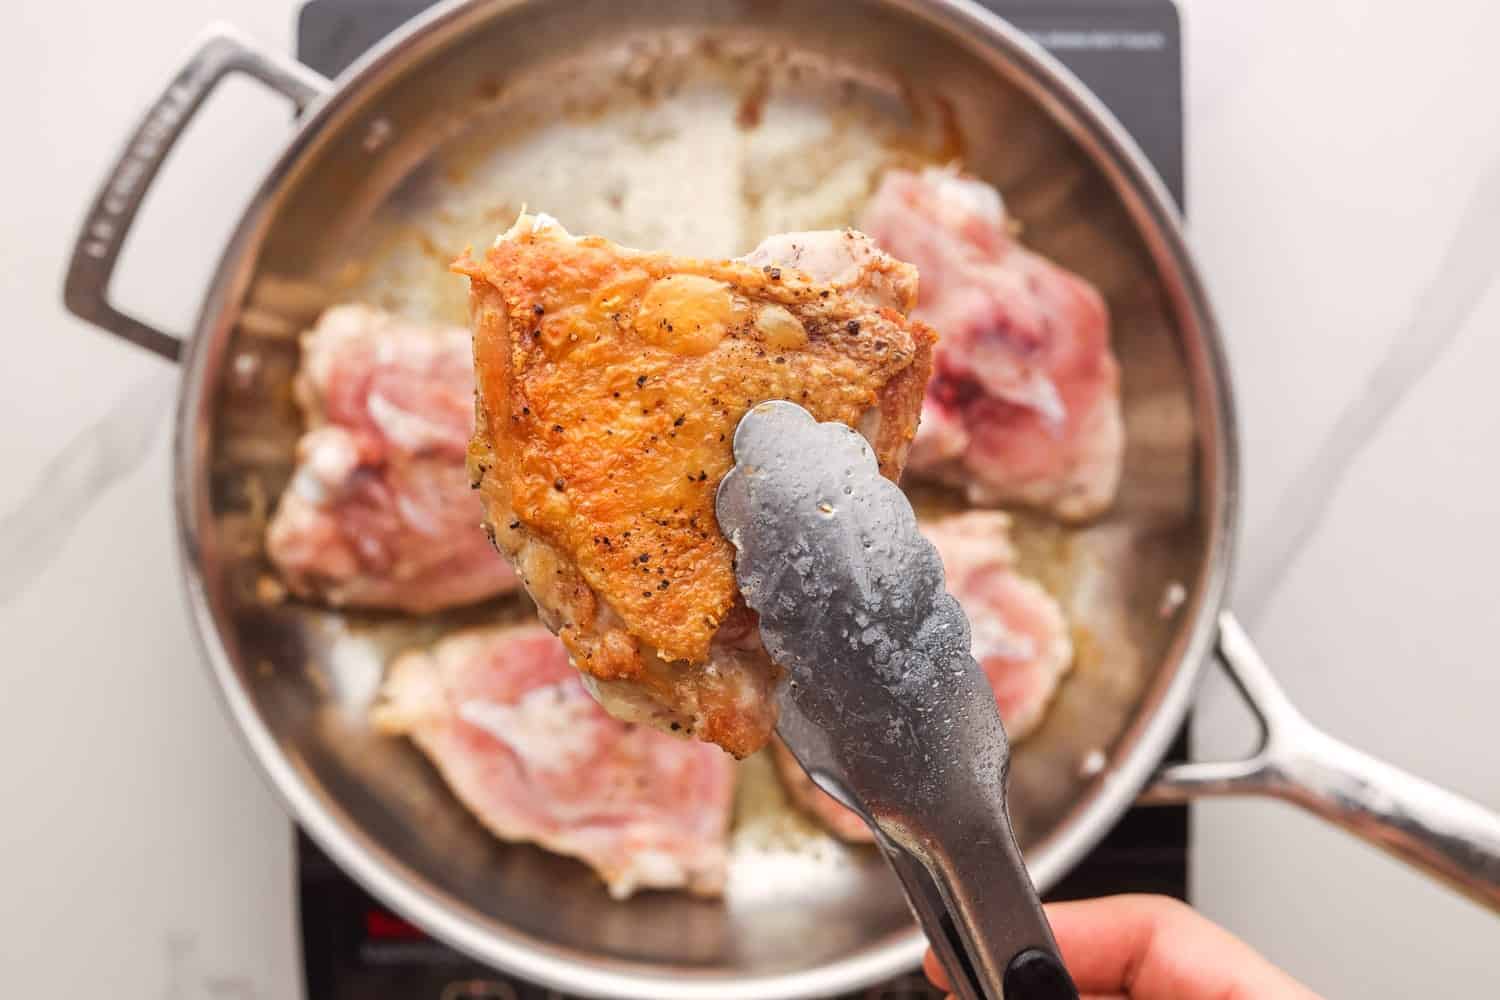 raw chicken thighs in a stainless steel pan, cooking. One is picked up with tongs to show how the skin has been browned.